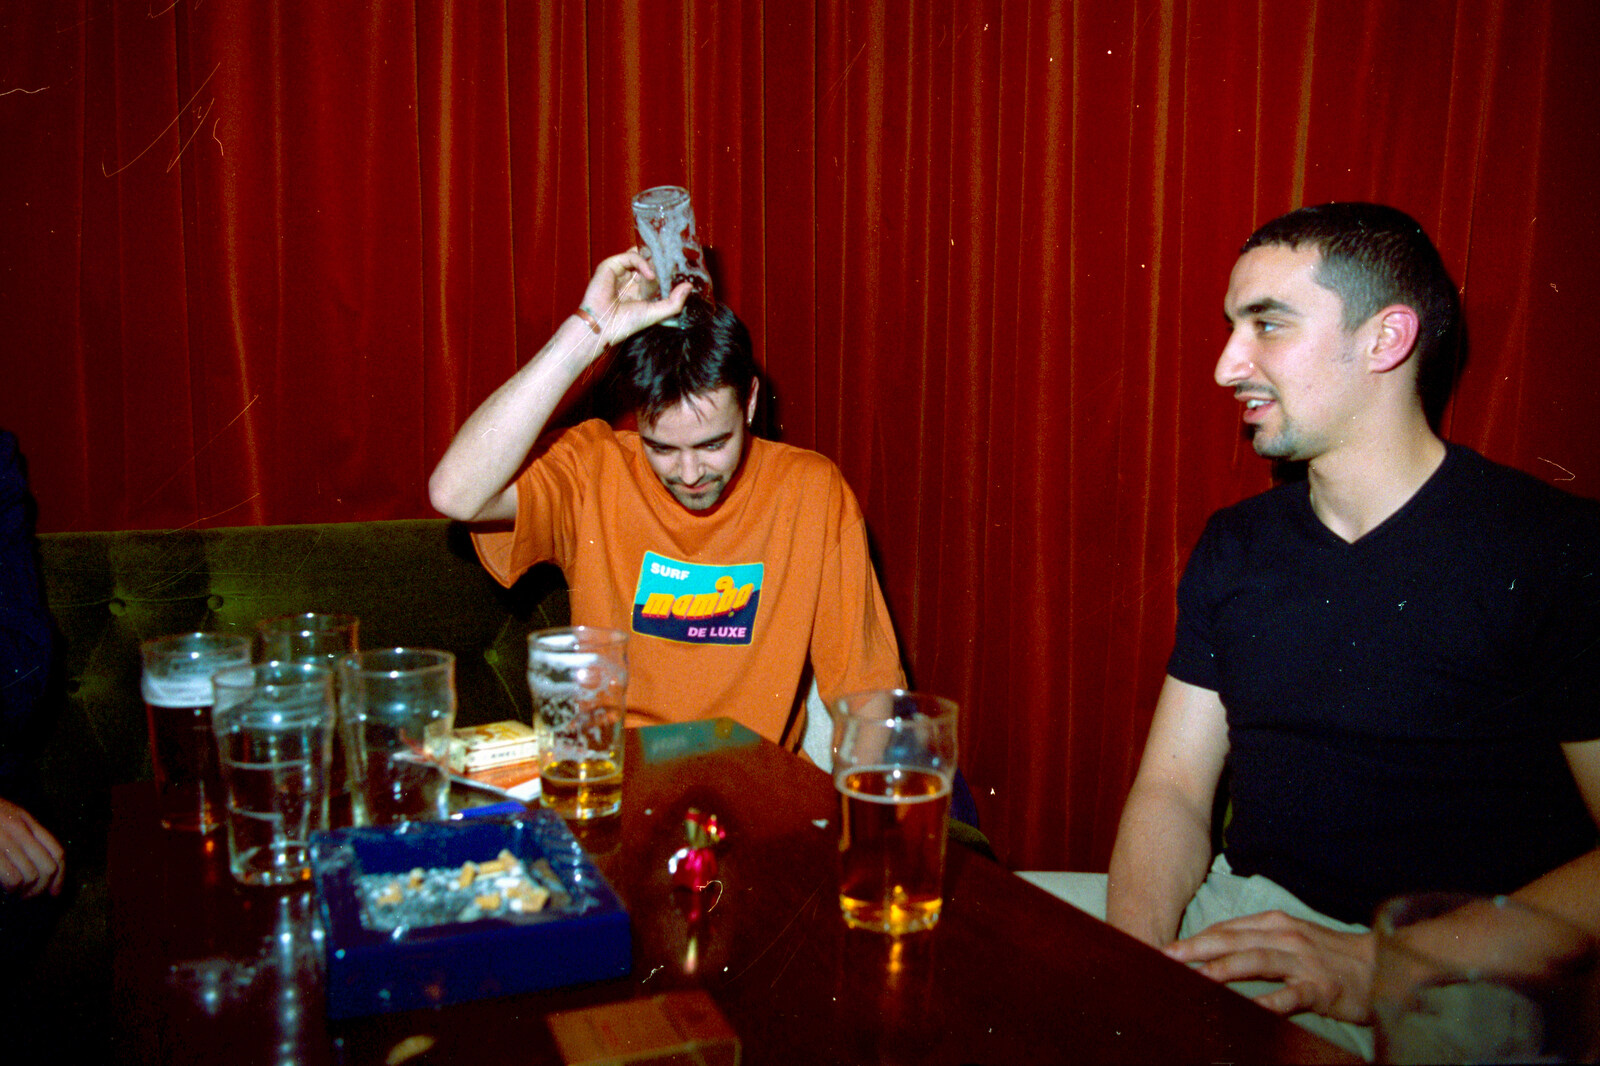 CISU Plays Cardinal's Hat in the SCC Social Club, Ipswich, Suffolk - 3rd August 1997: Fred puts his glass on his head